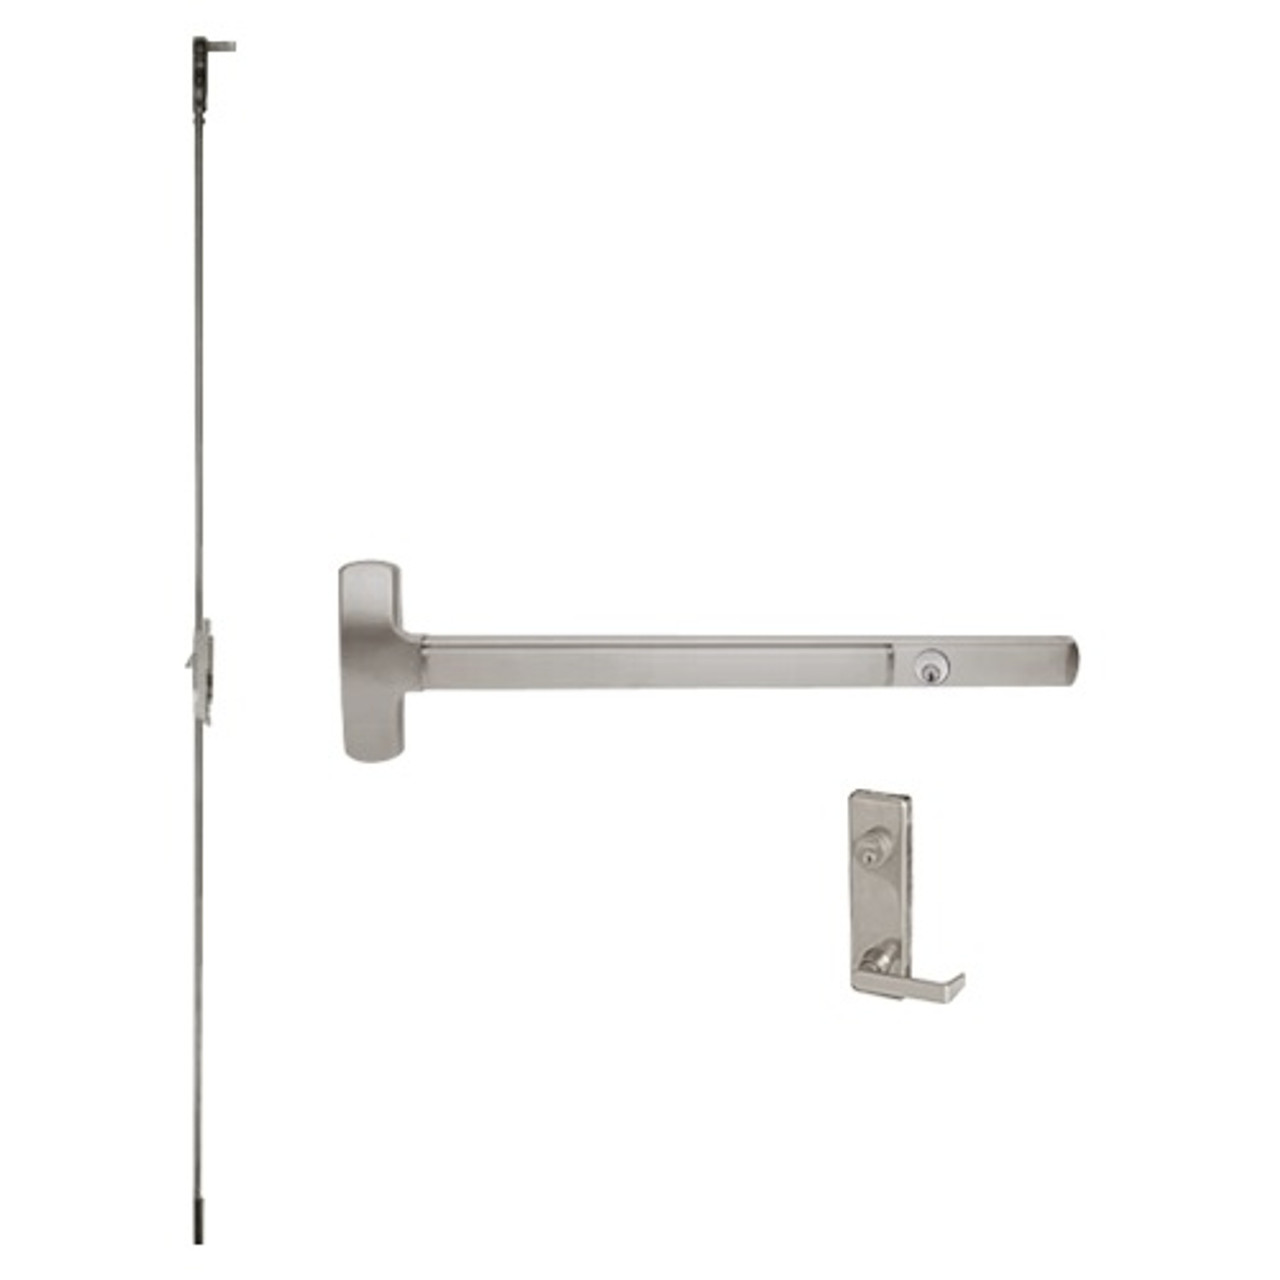 CD25-C-L-NL-DANE-US32D-3-RHR Falcon Exit Device in Satin Stainless Steel